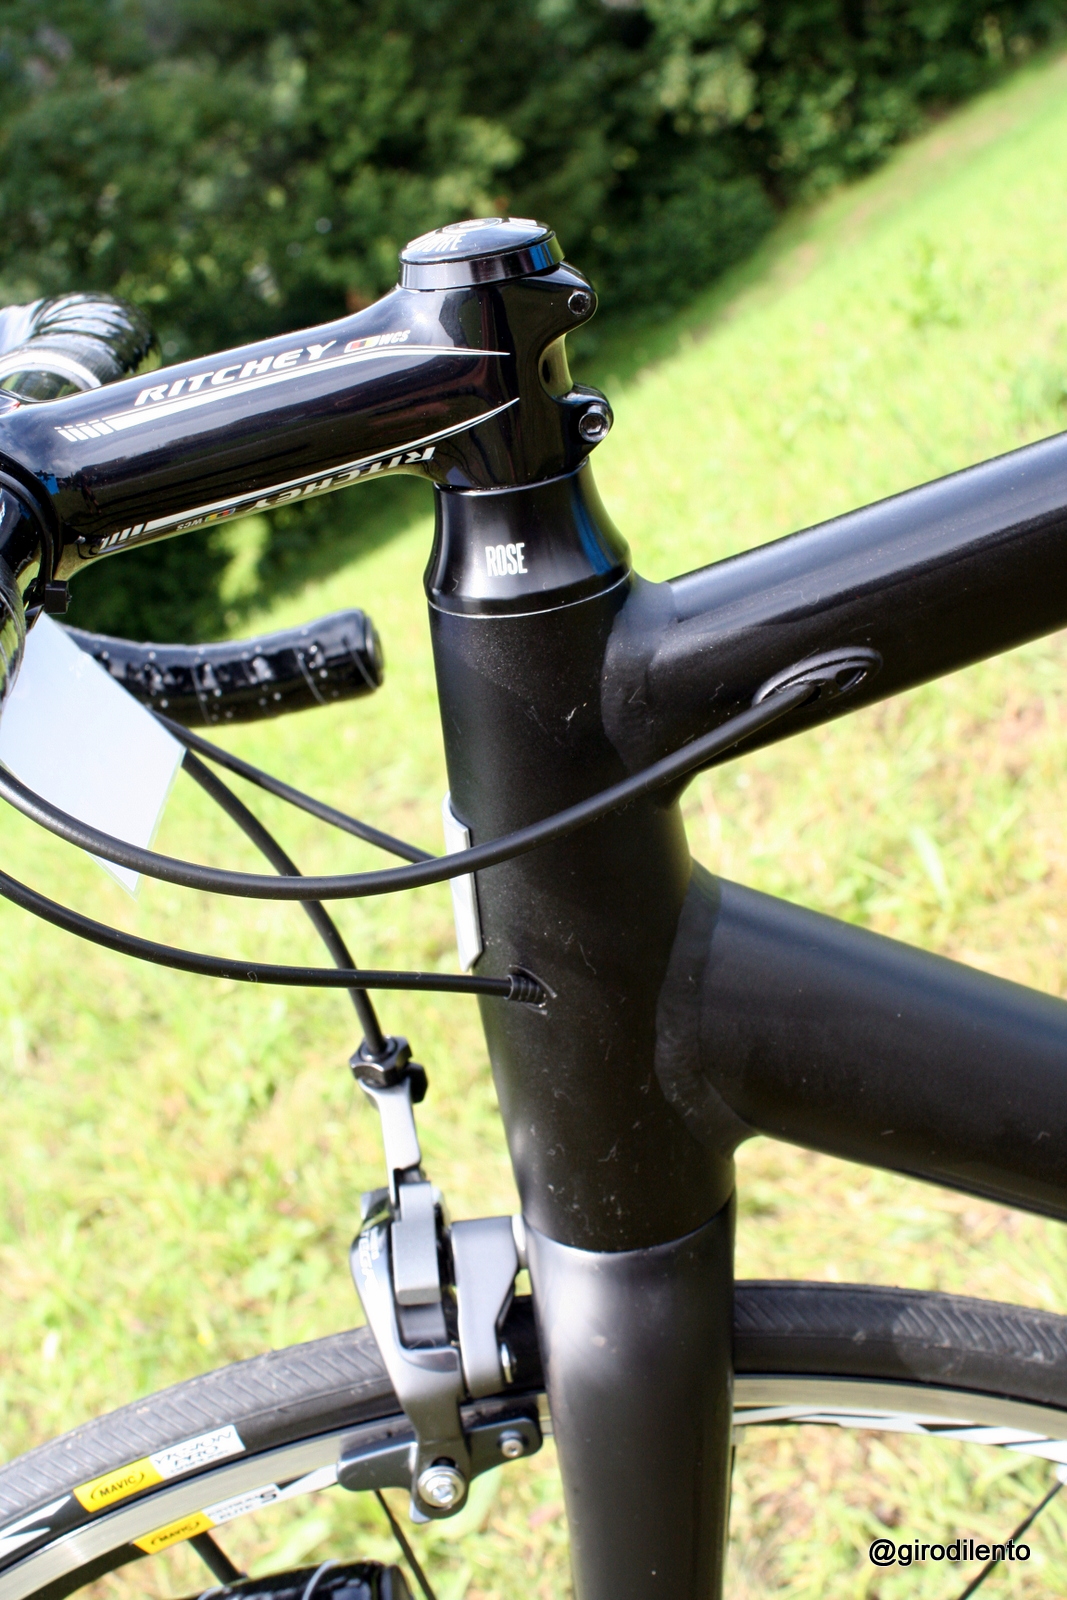 New Xeon RS headtube and cable routing